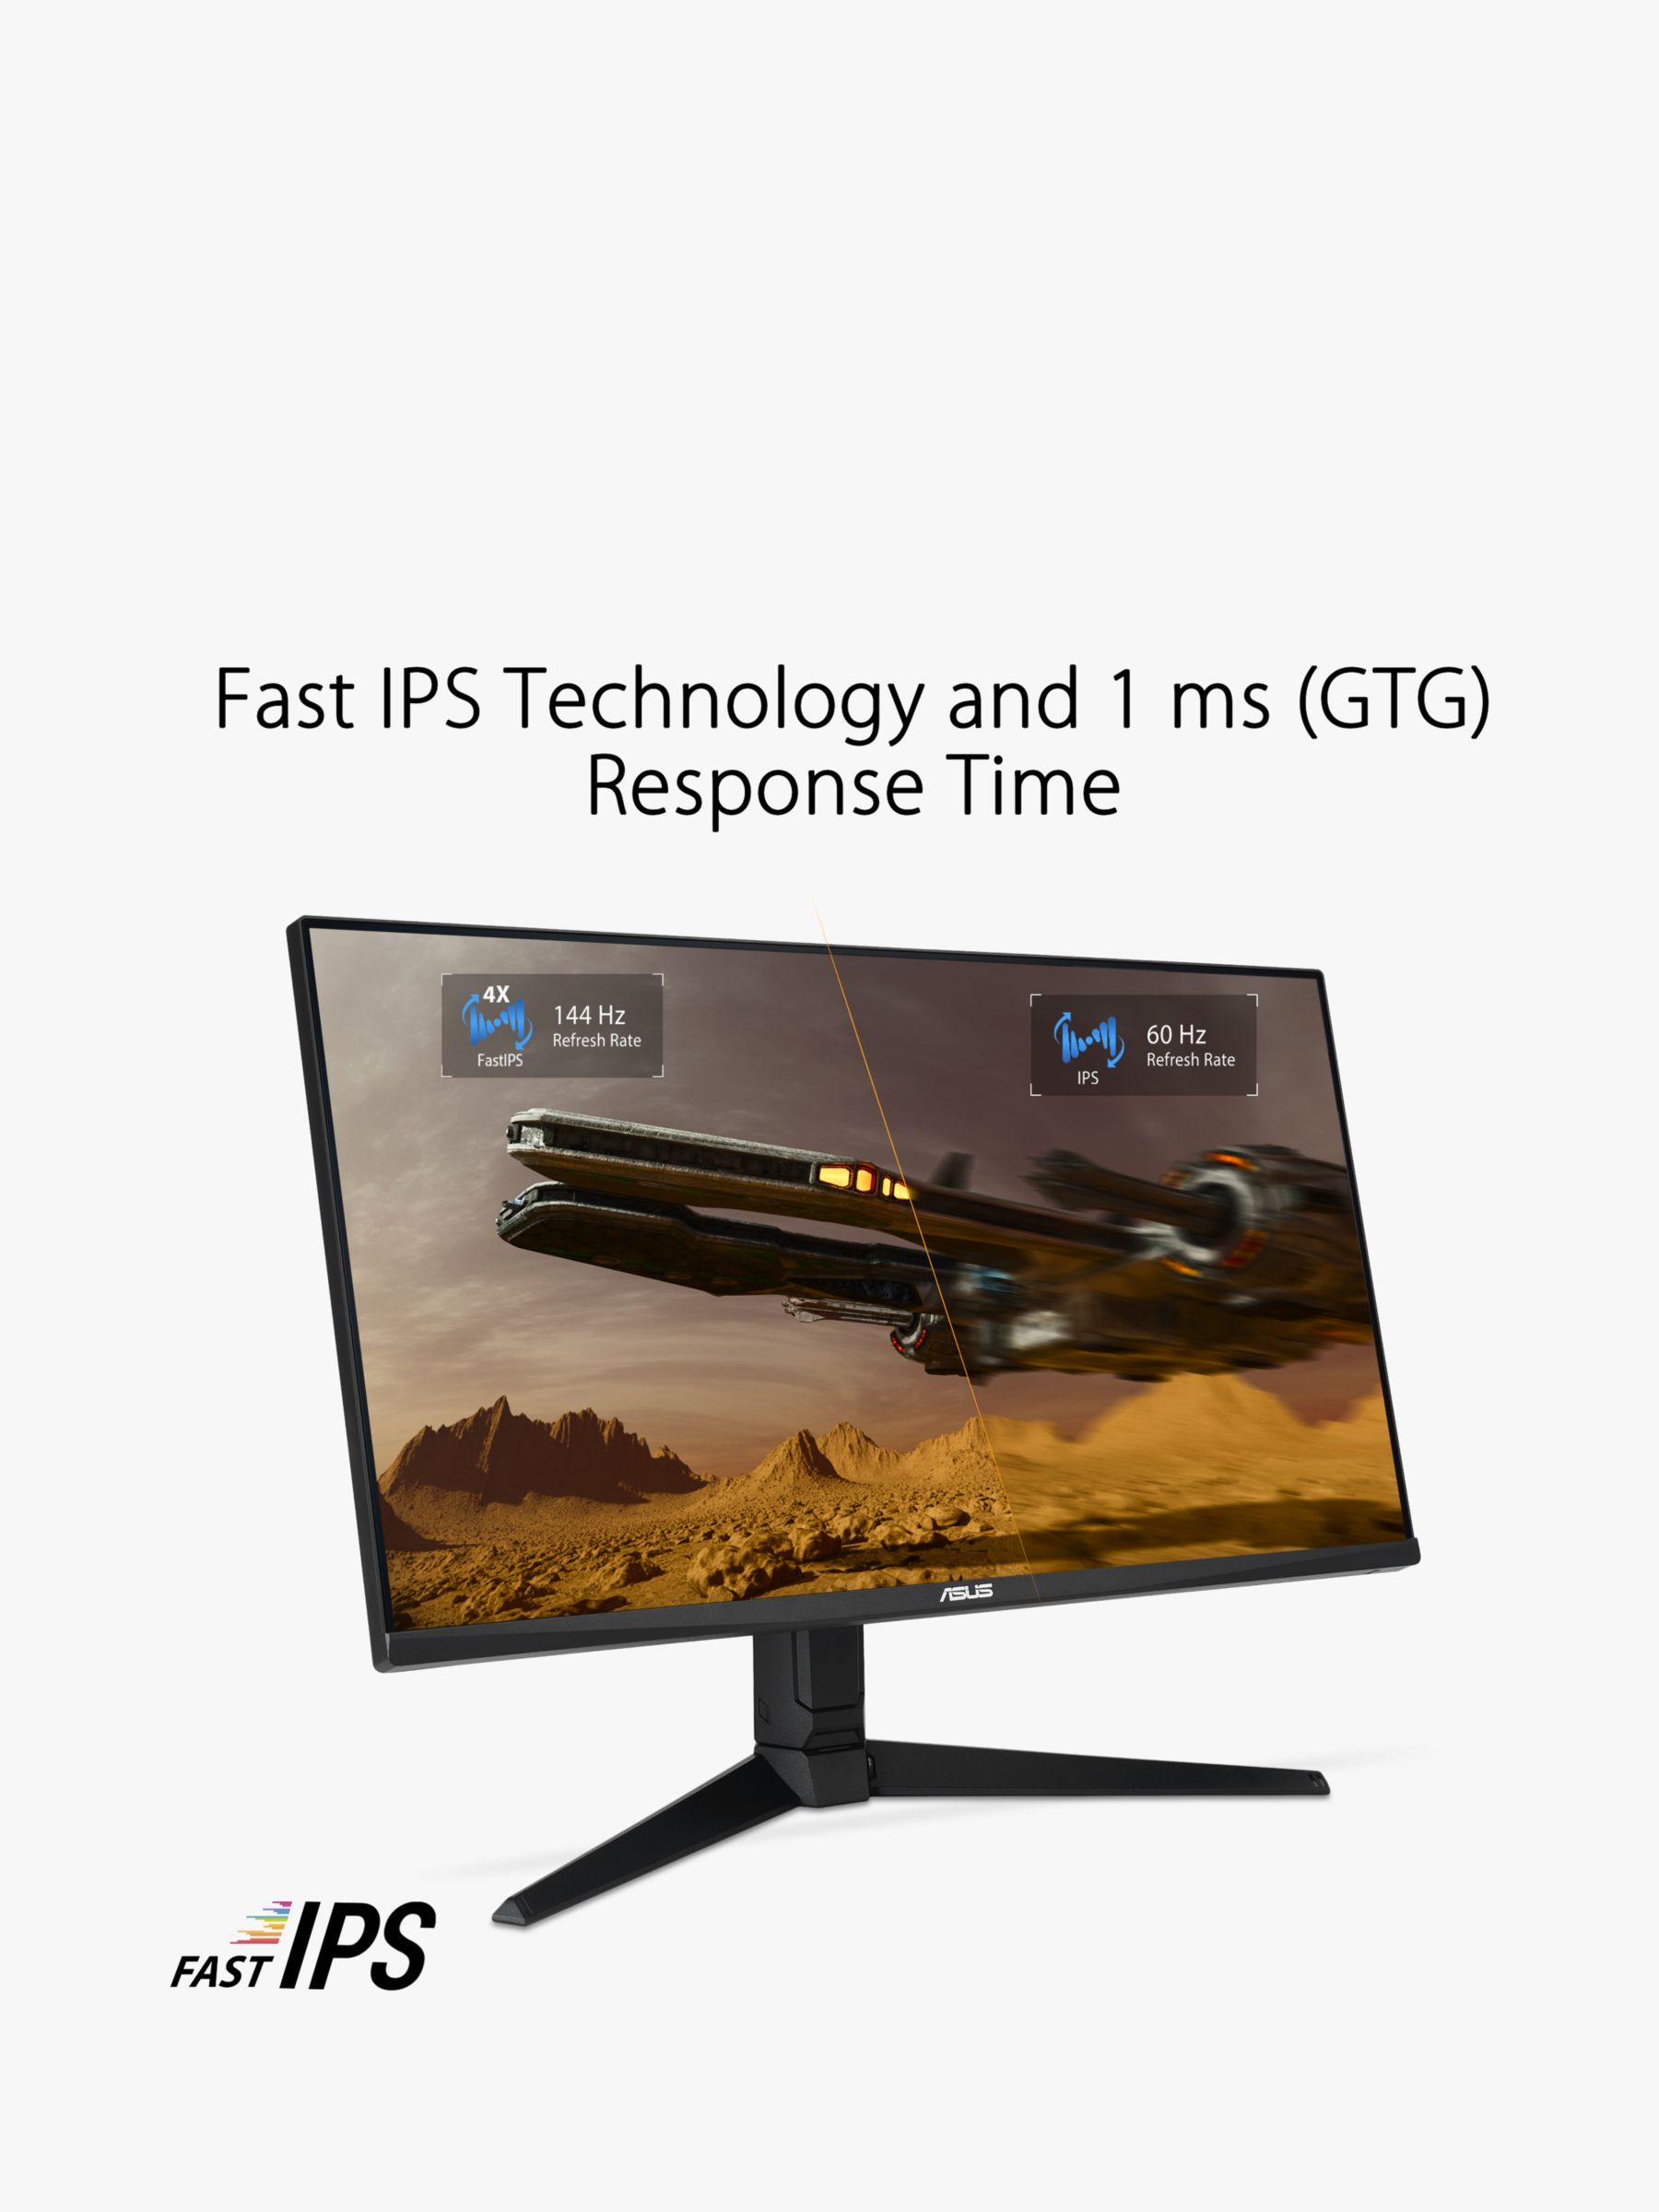 28 Gaming Monitor With UHD resolution and 144hz refresh rate